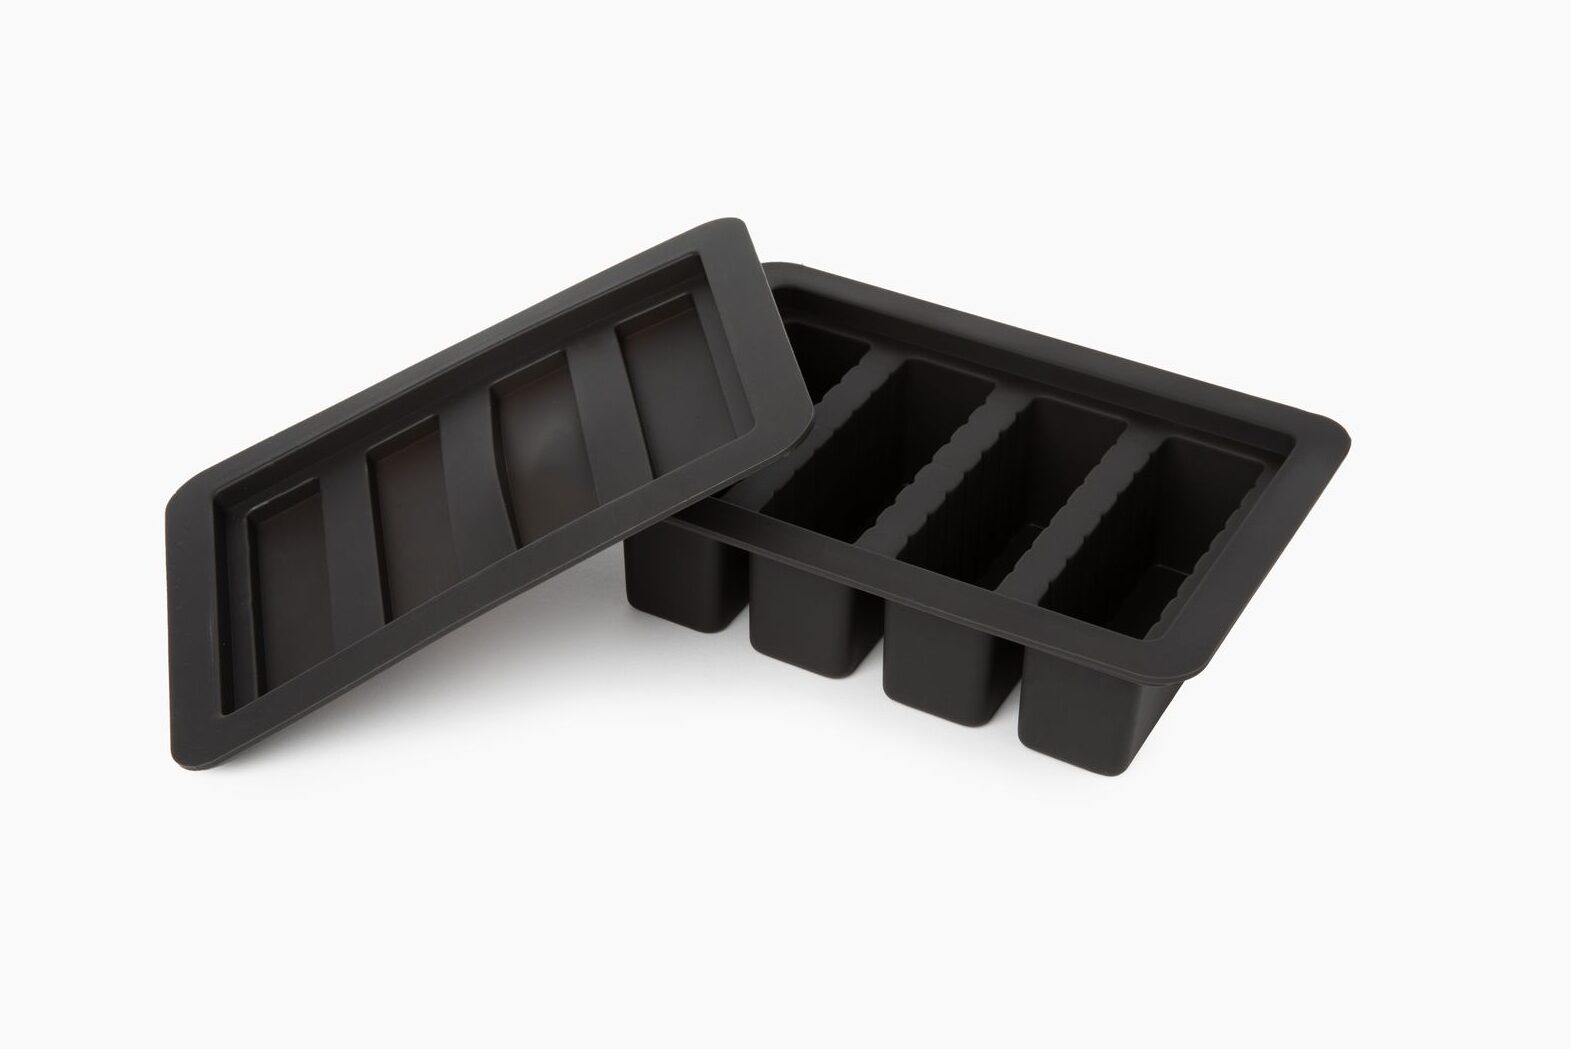 Silicone Butter Stick Mold with Lid